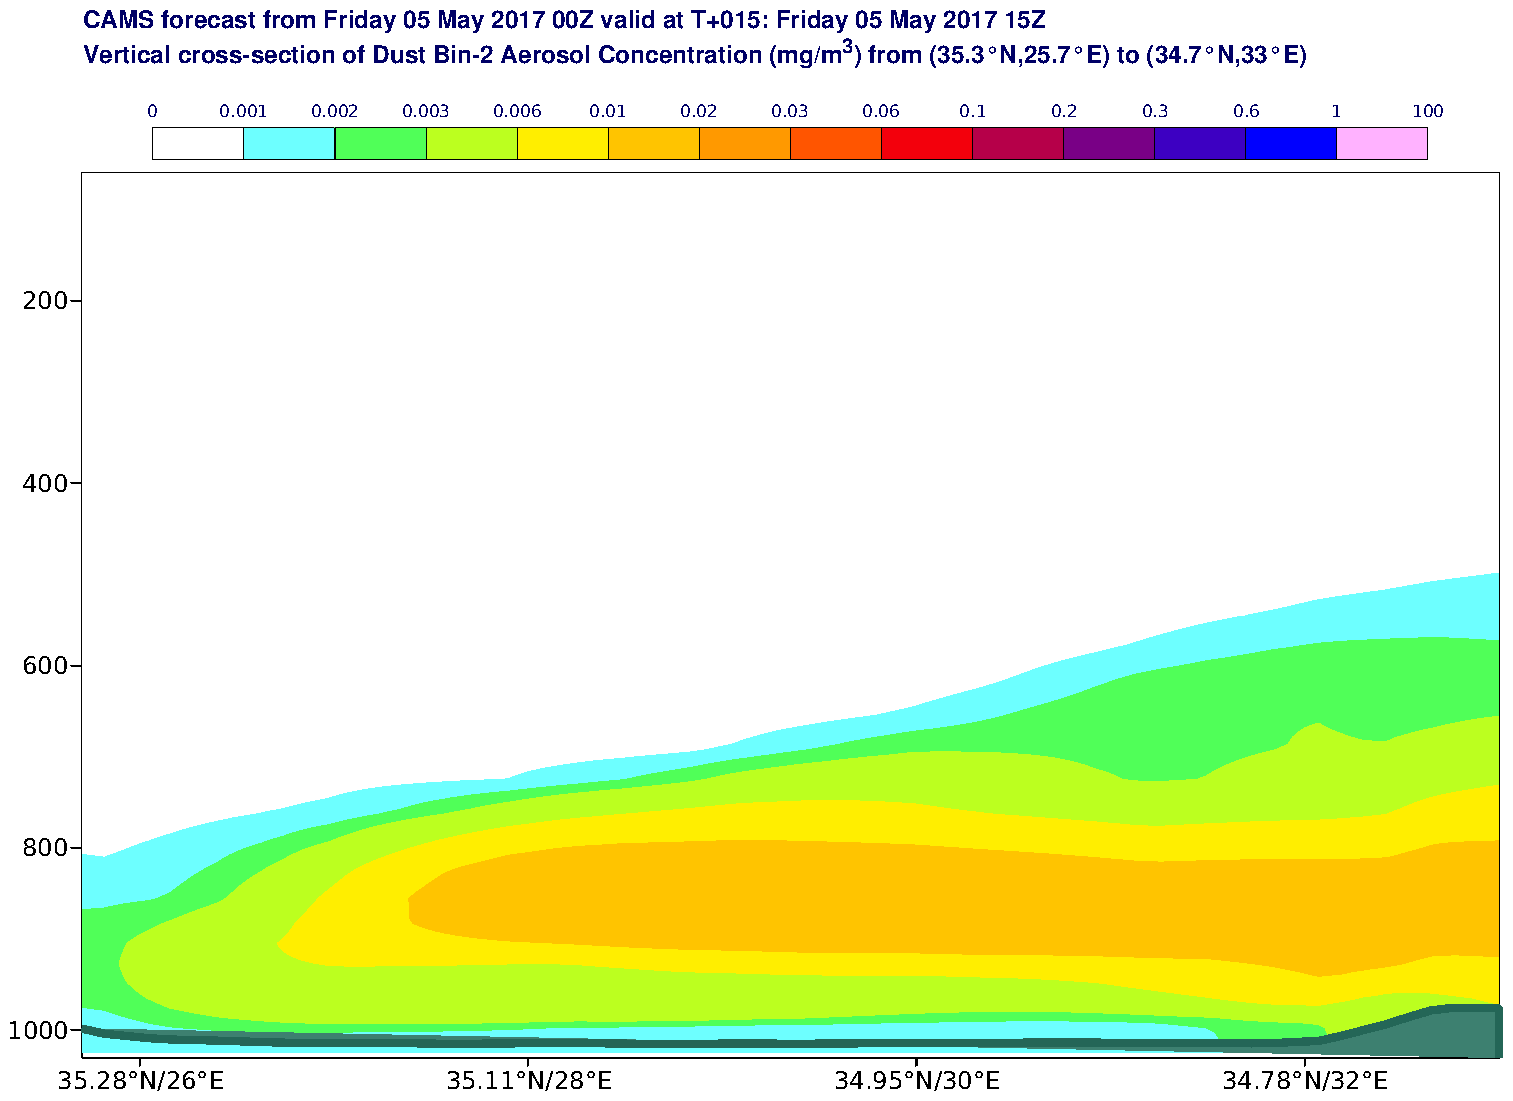 Vertical cross-section of Dust Bin-2 Aerosol Concentration (mg/m3) valid at T15 - 2017-05-05 15:00